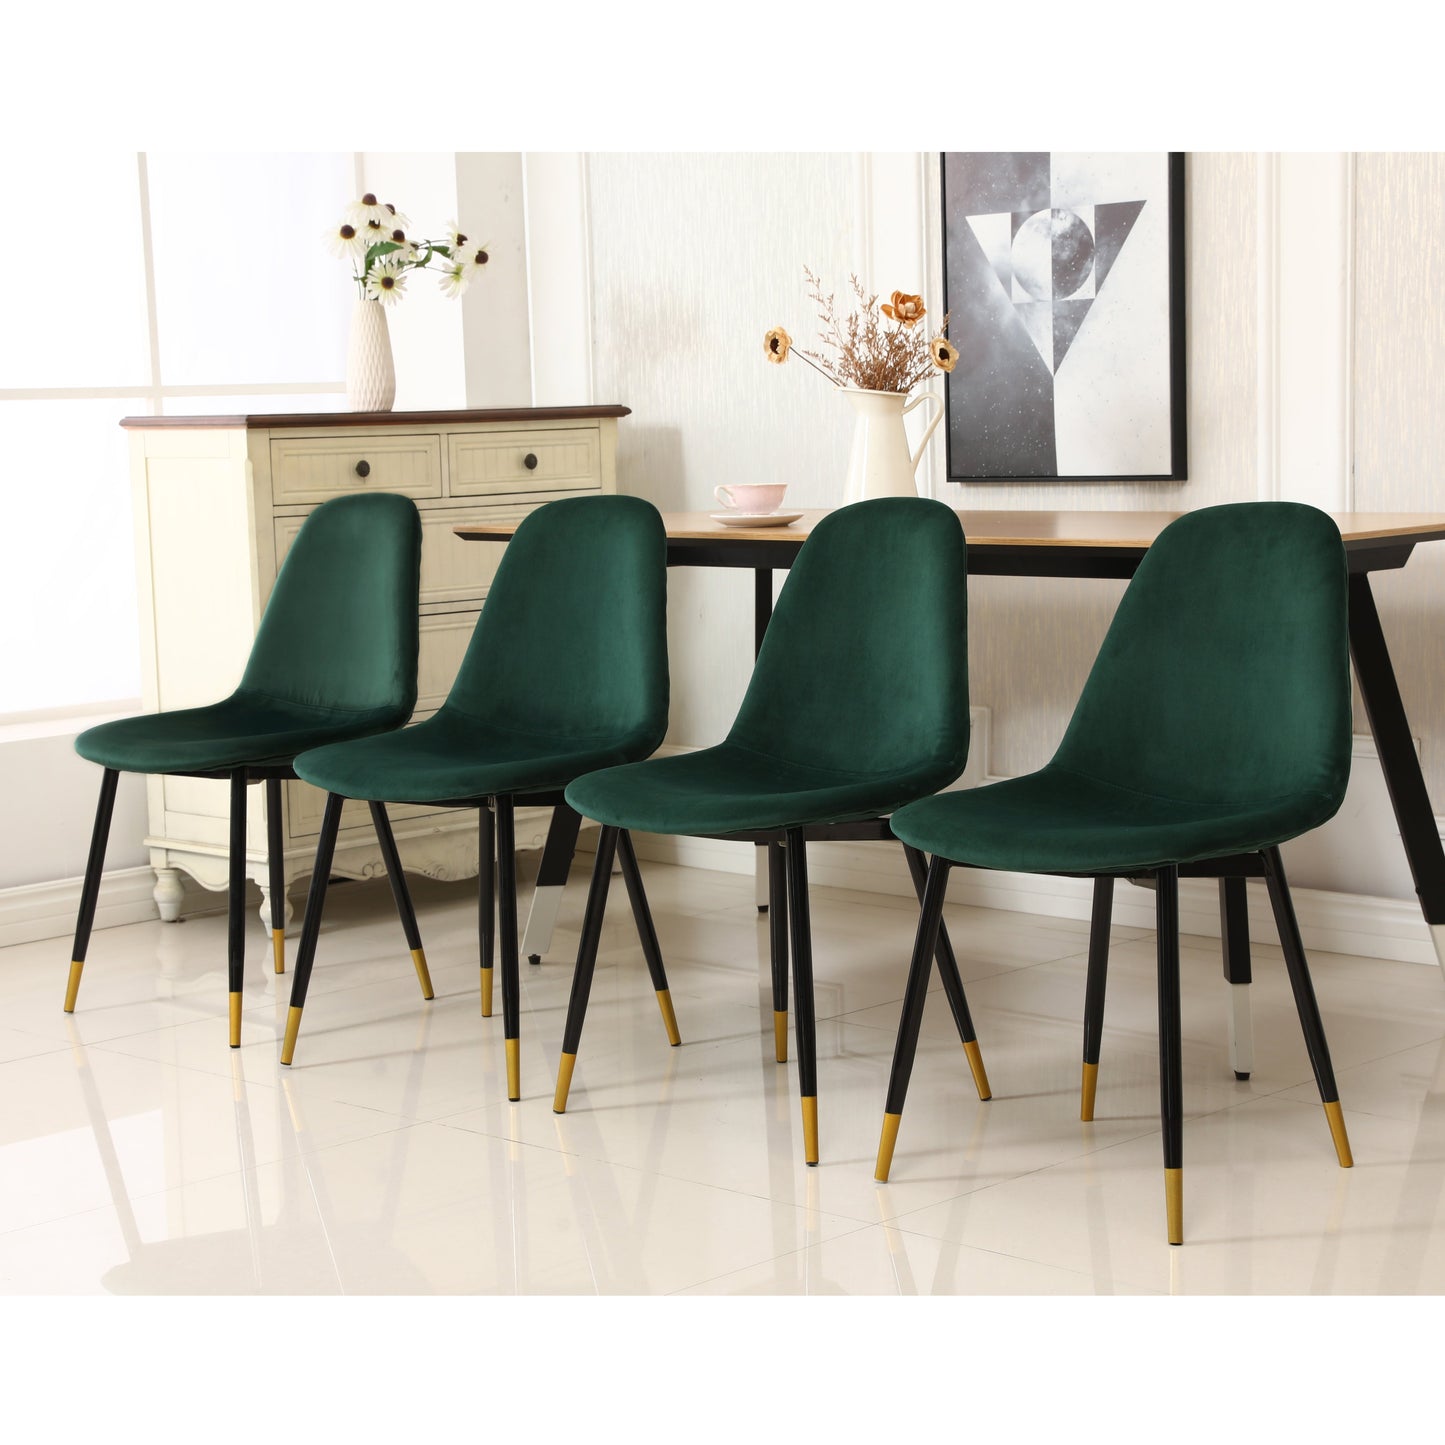 Lassan Contemporary Fabric Dining Chairs, Set of 4, Green